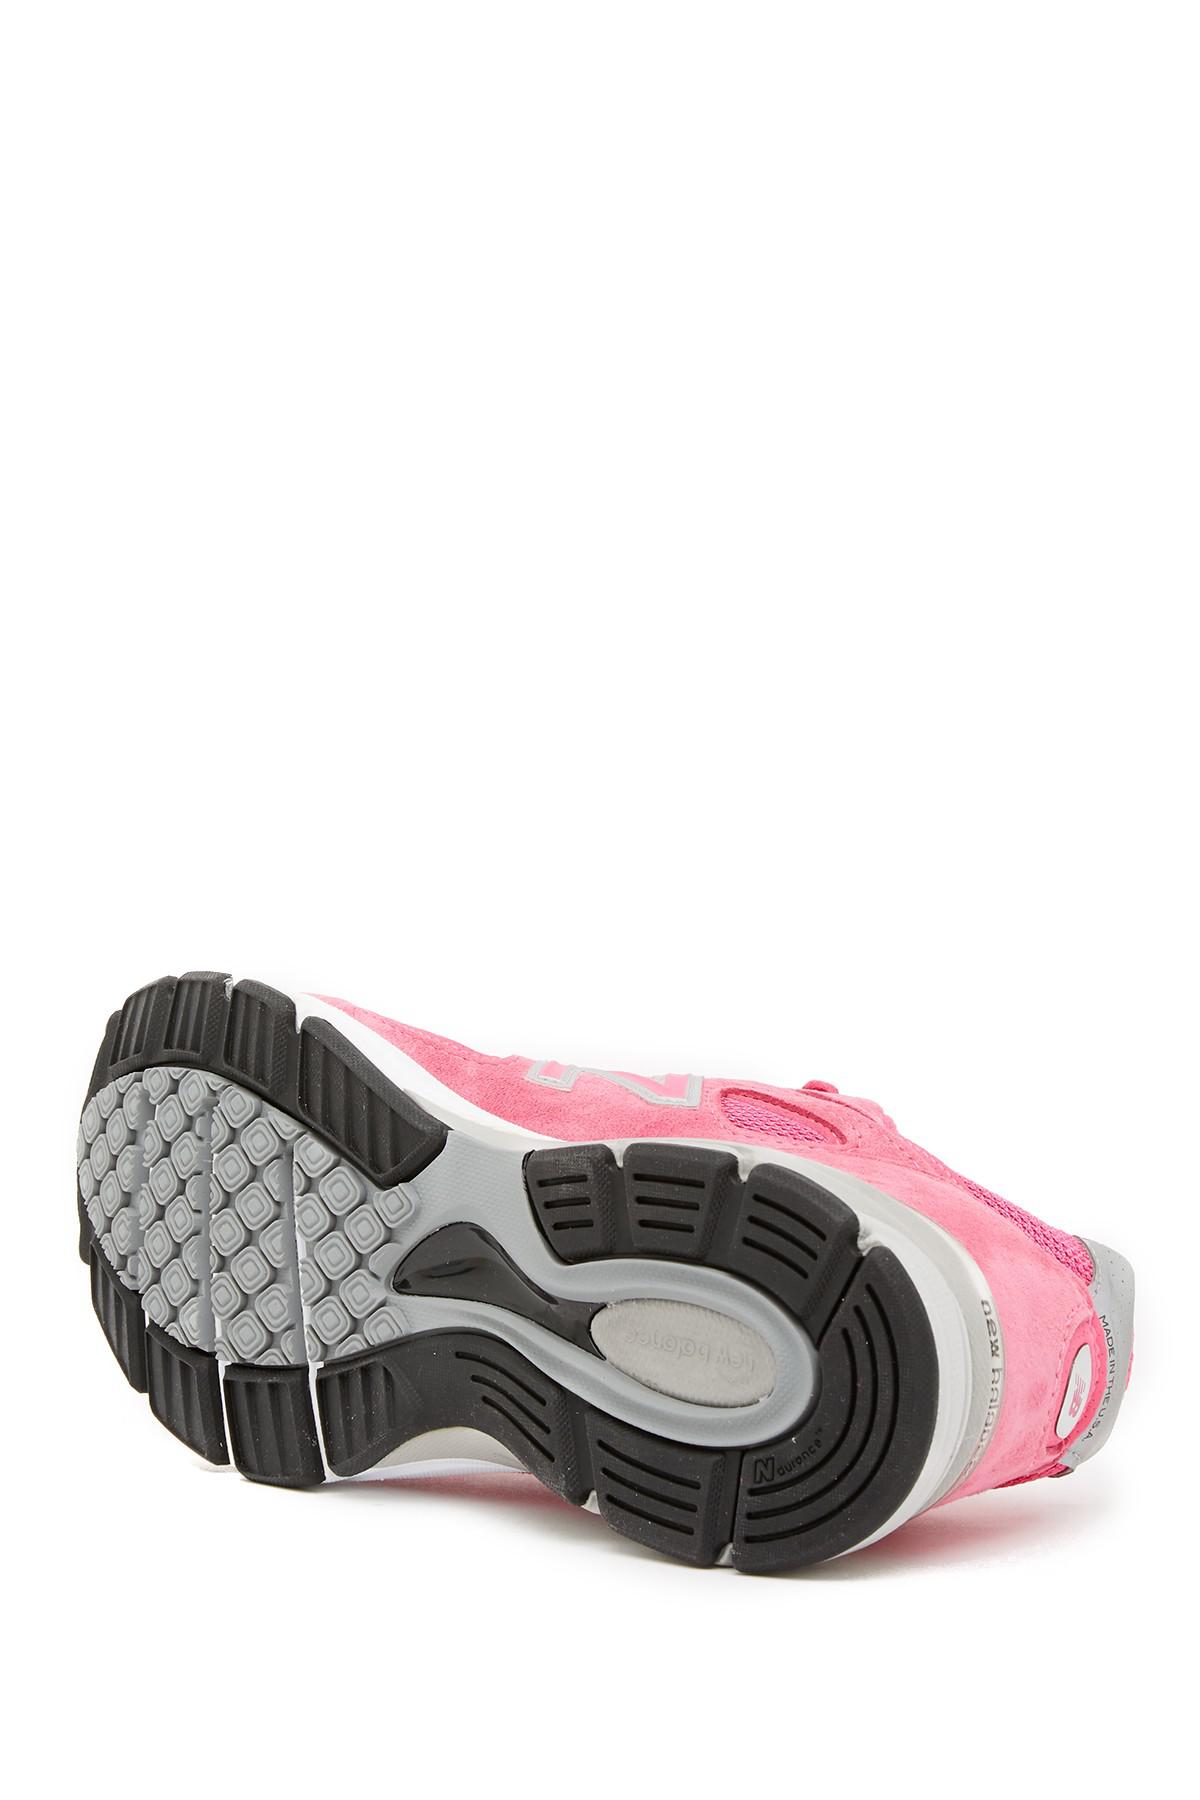 New Balance Suede 990 Susan G. Komen Limited Edition Sneaker in Pink - Lyst